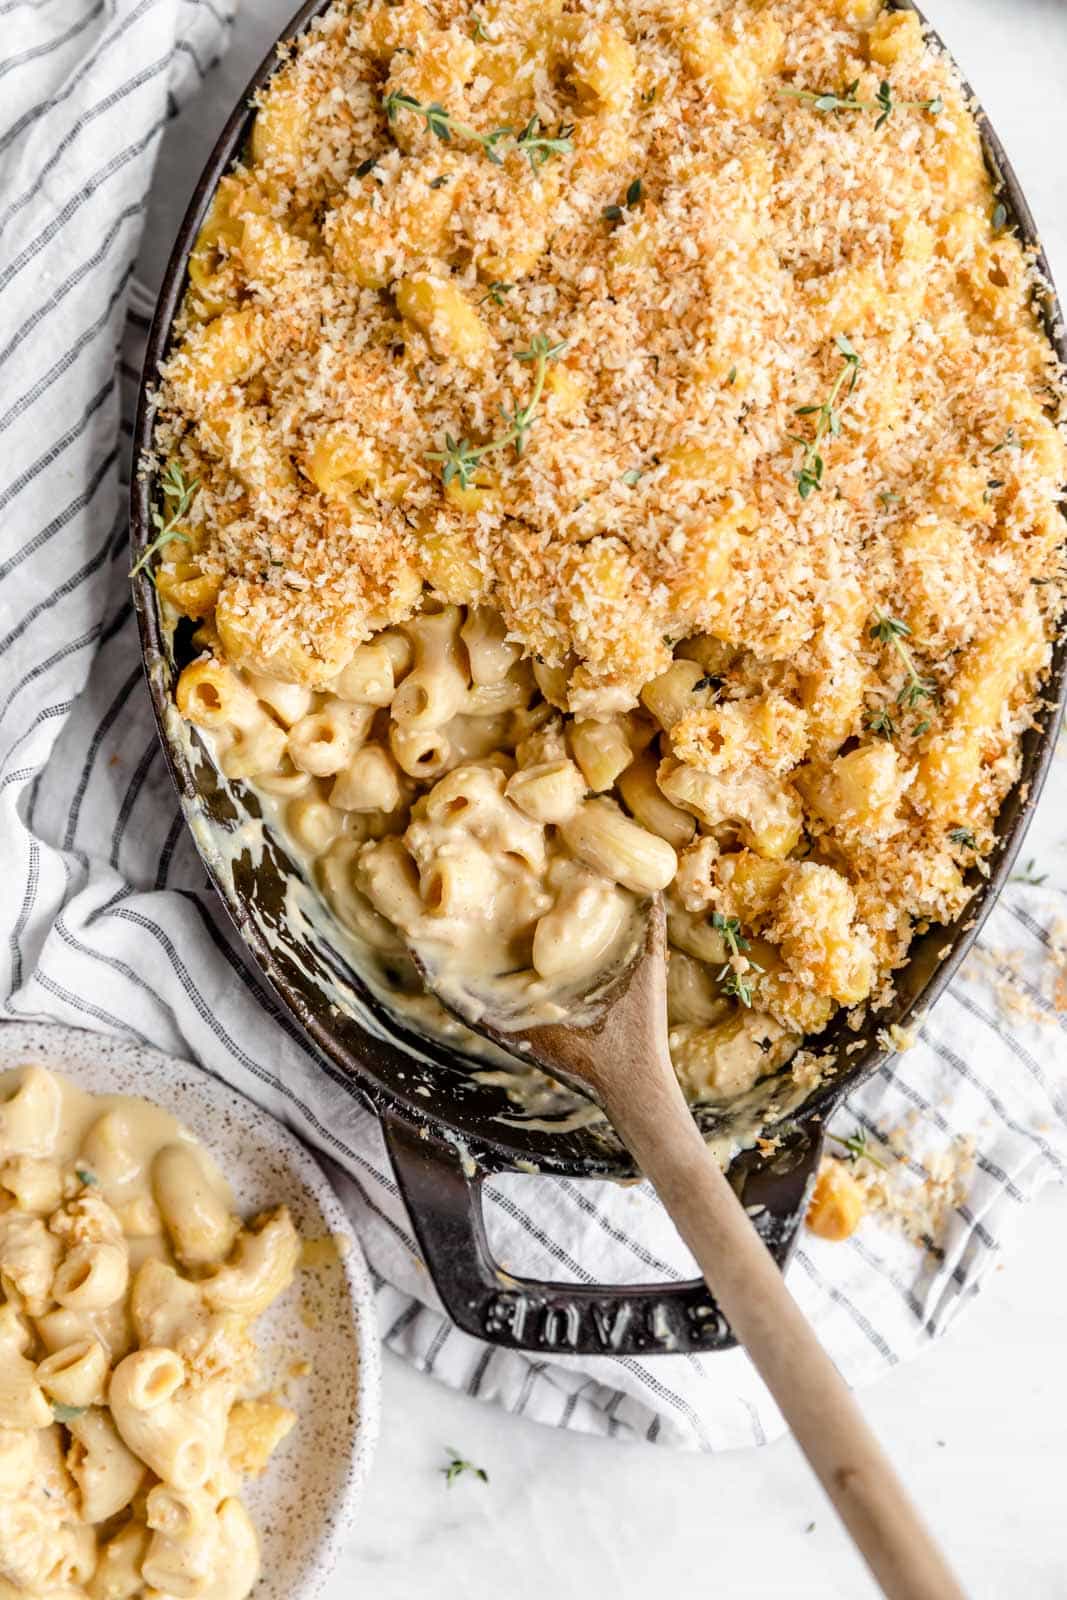 Mind-Blowing Vegan Mac and Cheese